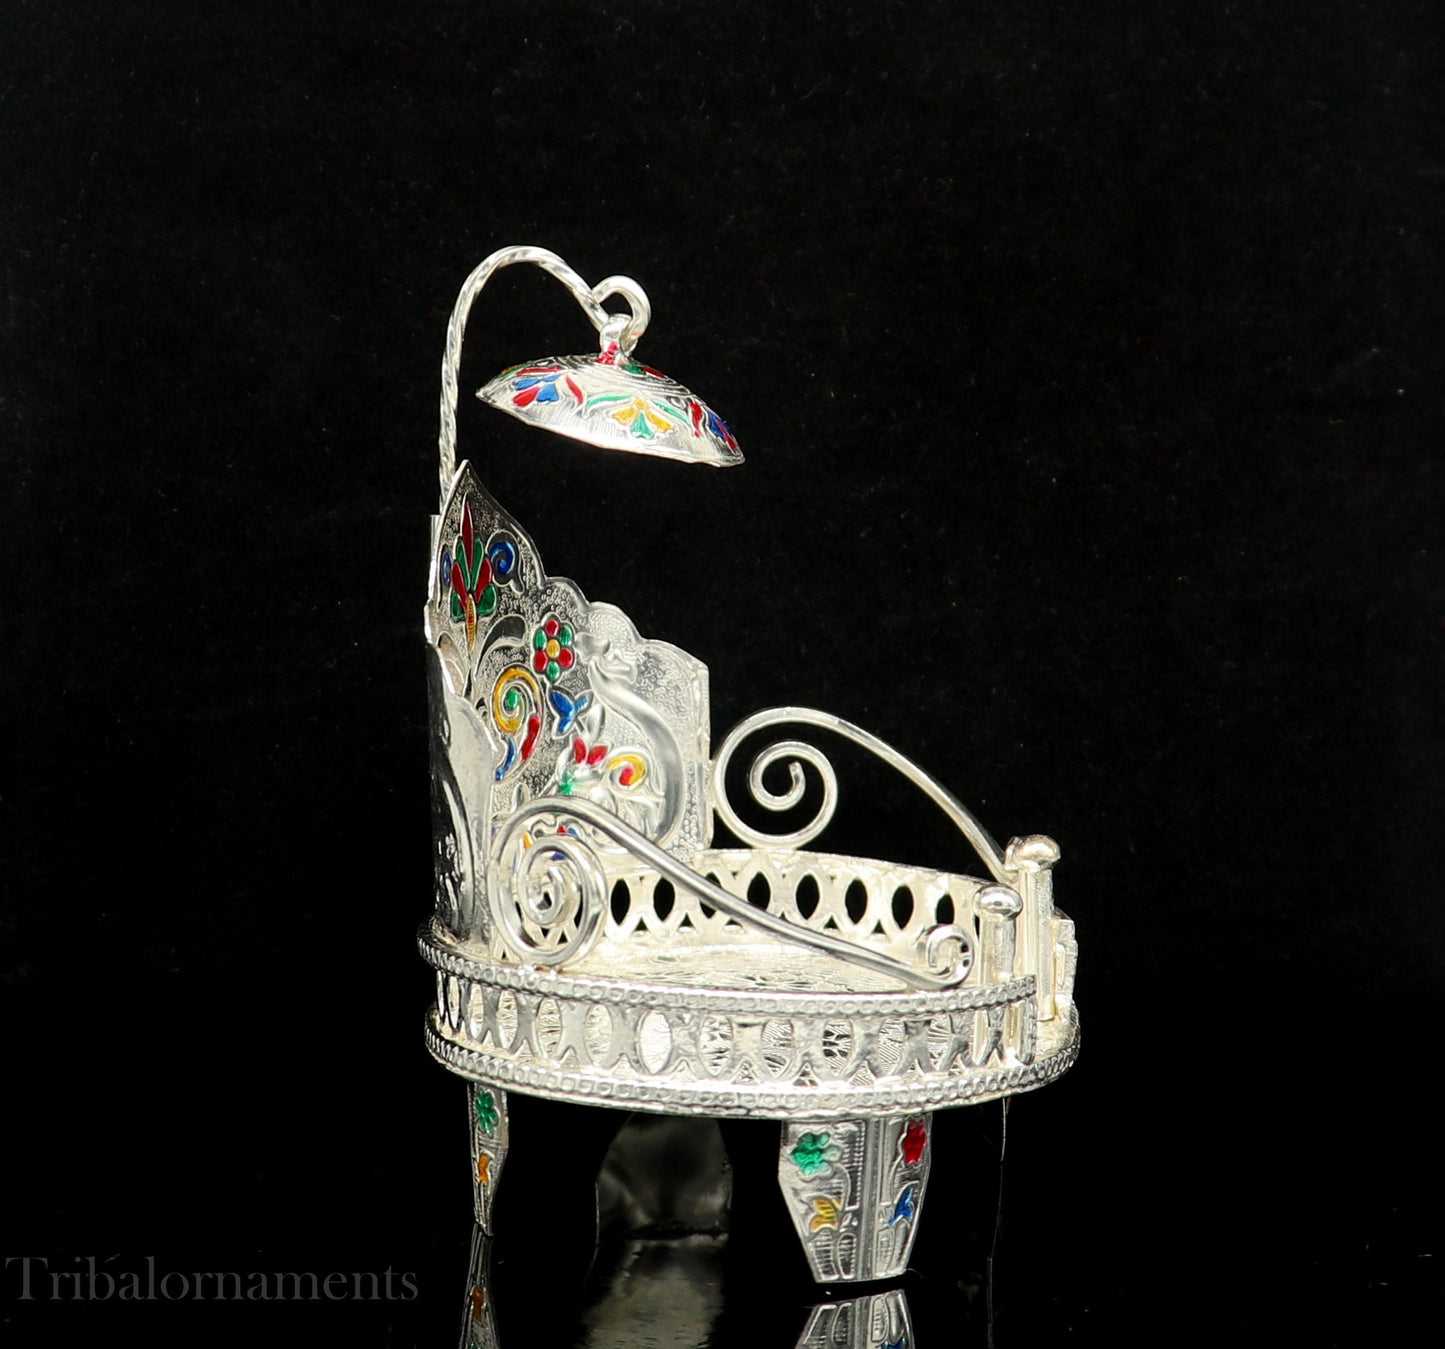 Silver throne 925 sterling silver handcrafted small sinhasan, idol god throne, god statue's stand chair, temple puja god article su529 - TRIBAL ORNAMENTS